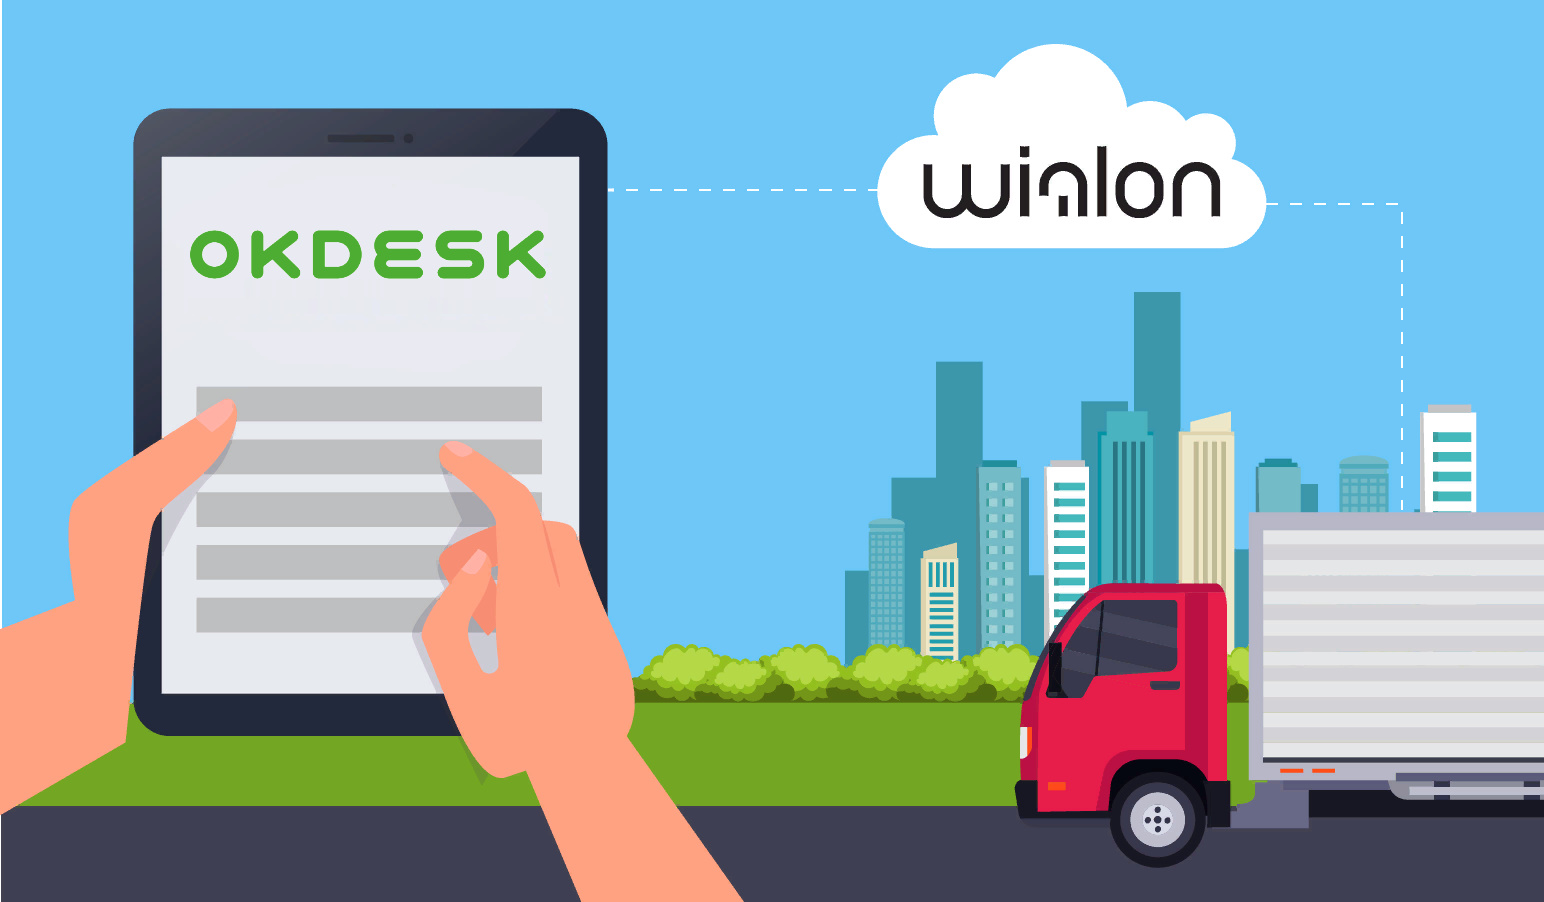 Leading Helpdesk system. Out of the box integration with Wialon